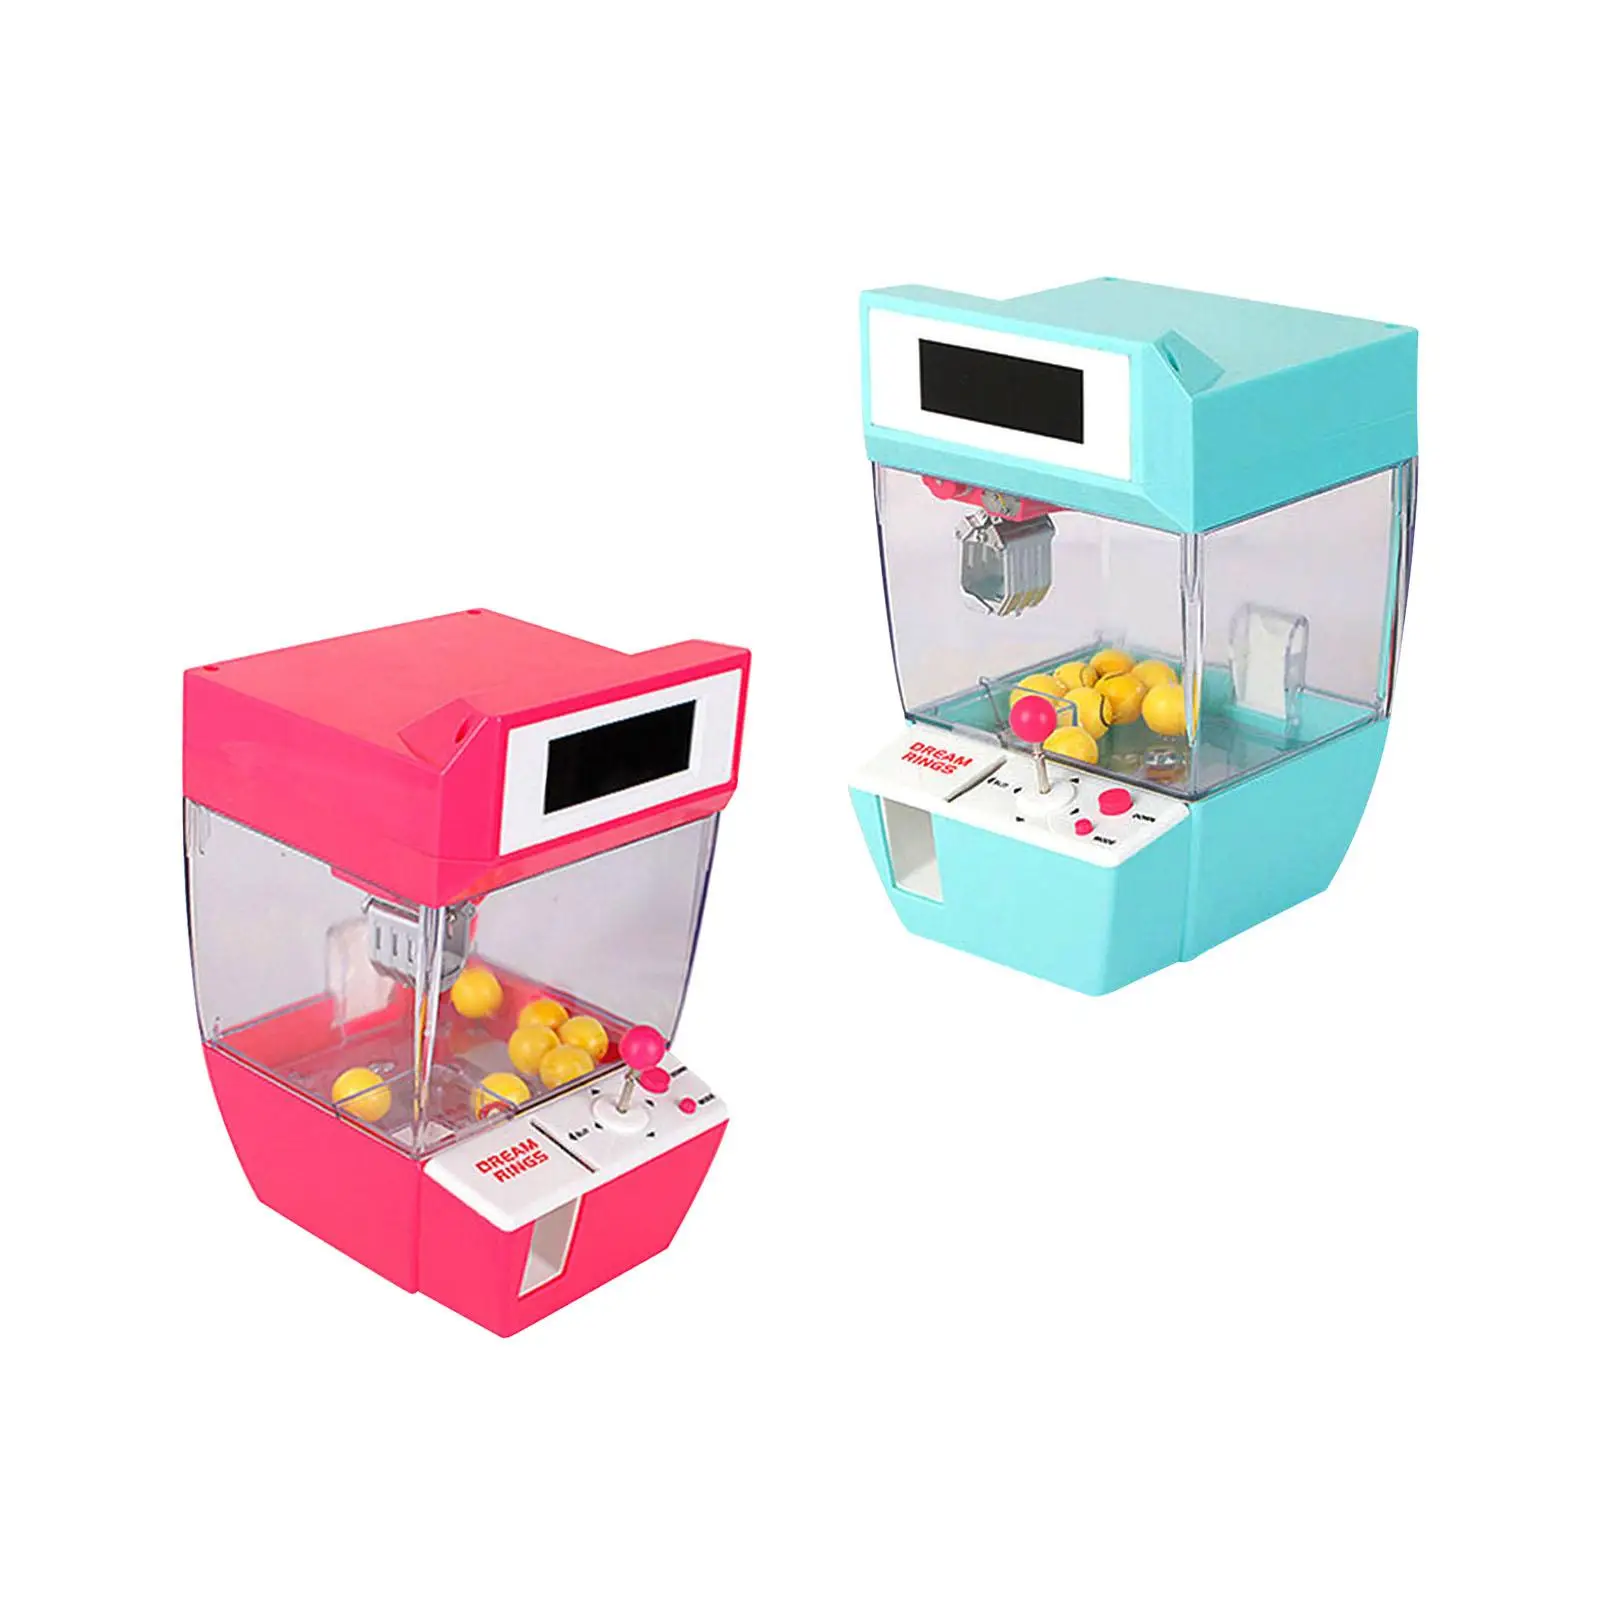 Arcade Claw Machine for Kids for Children Birthday Party Light and Sounds Alarm Clock and Games Modes